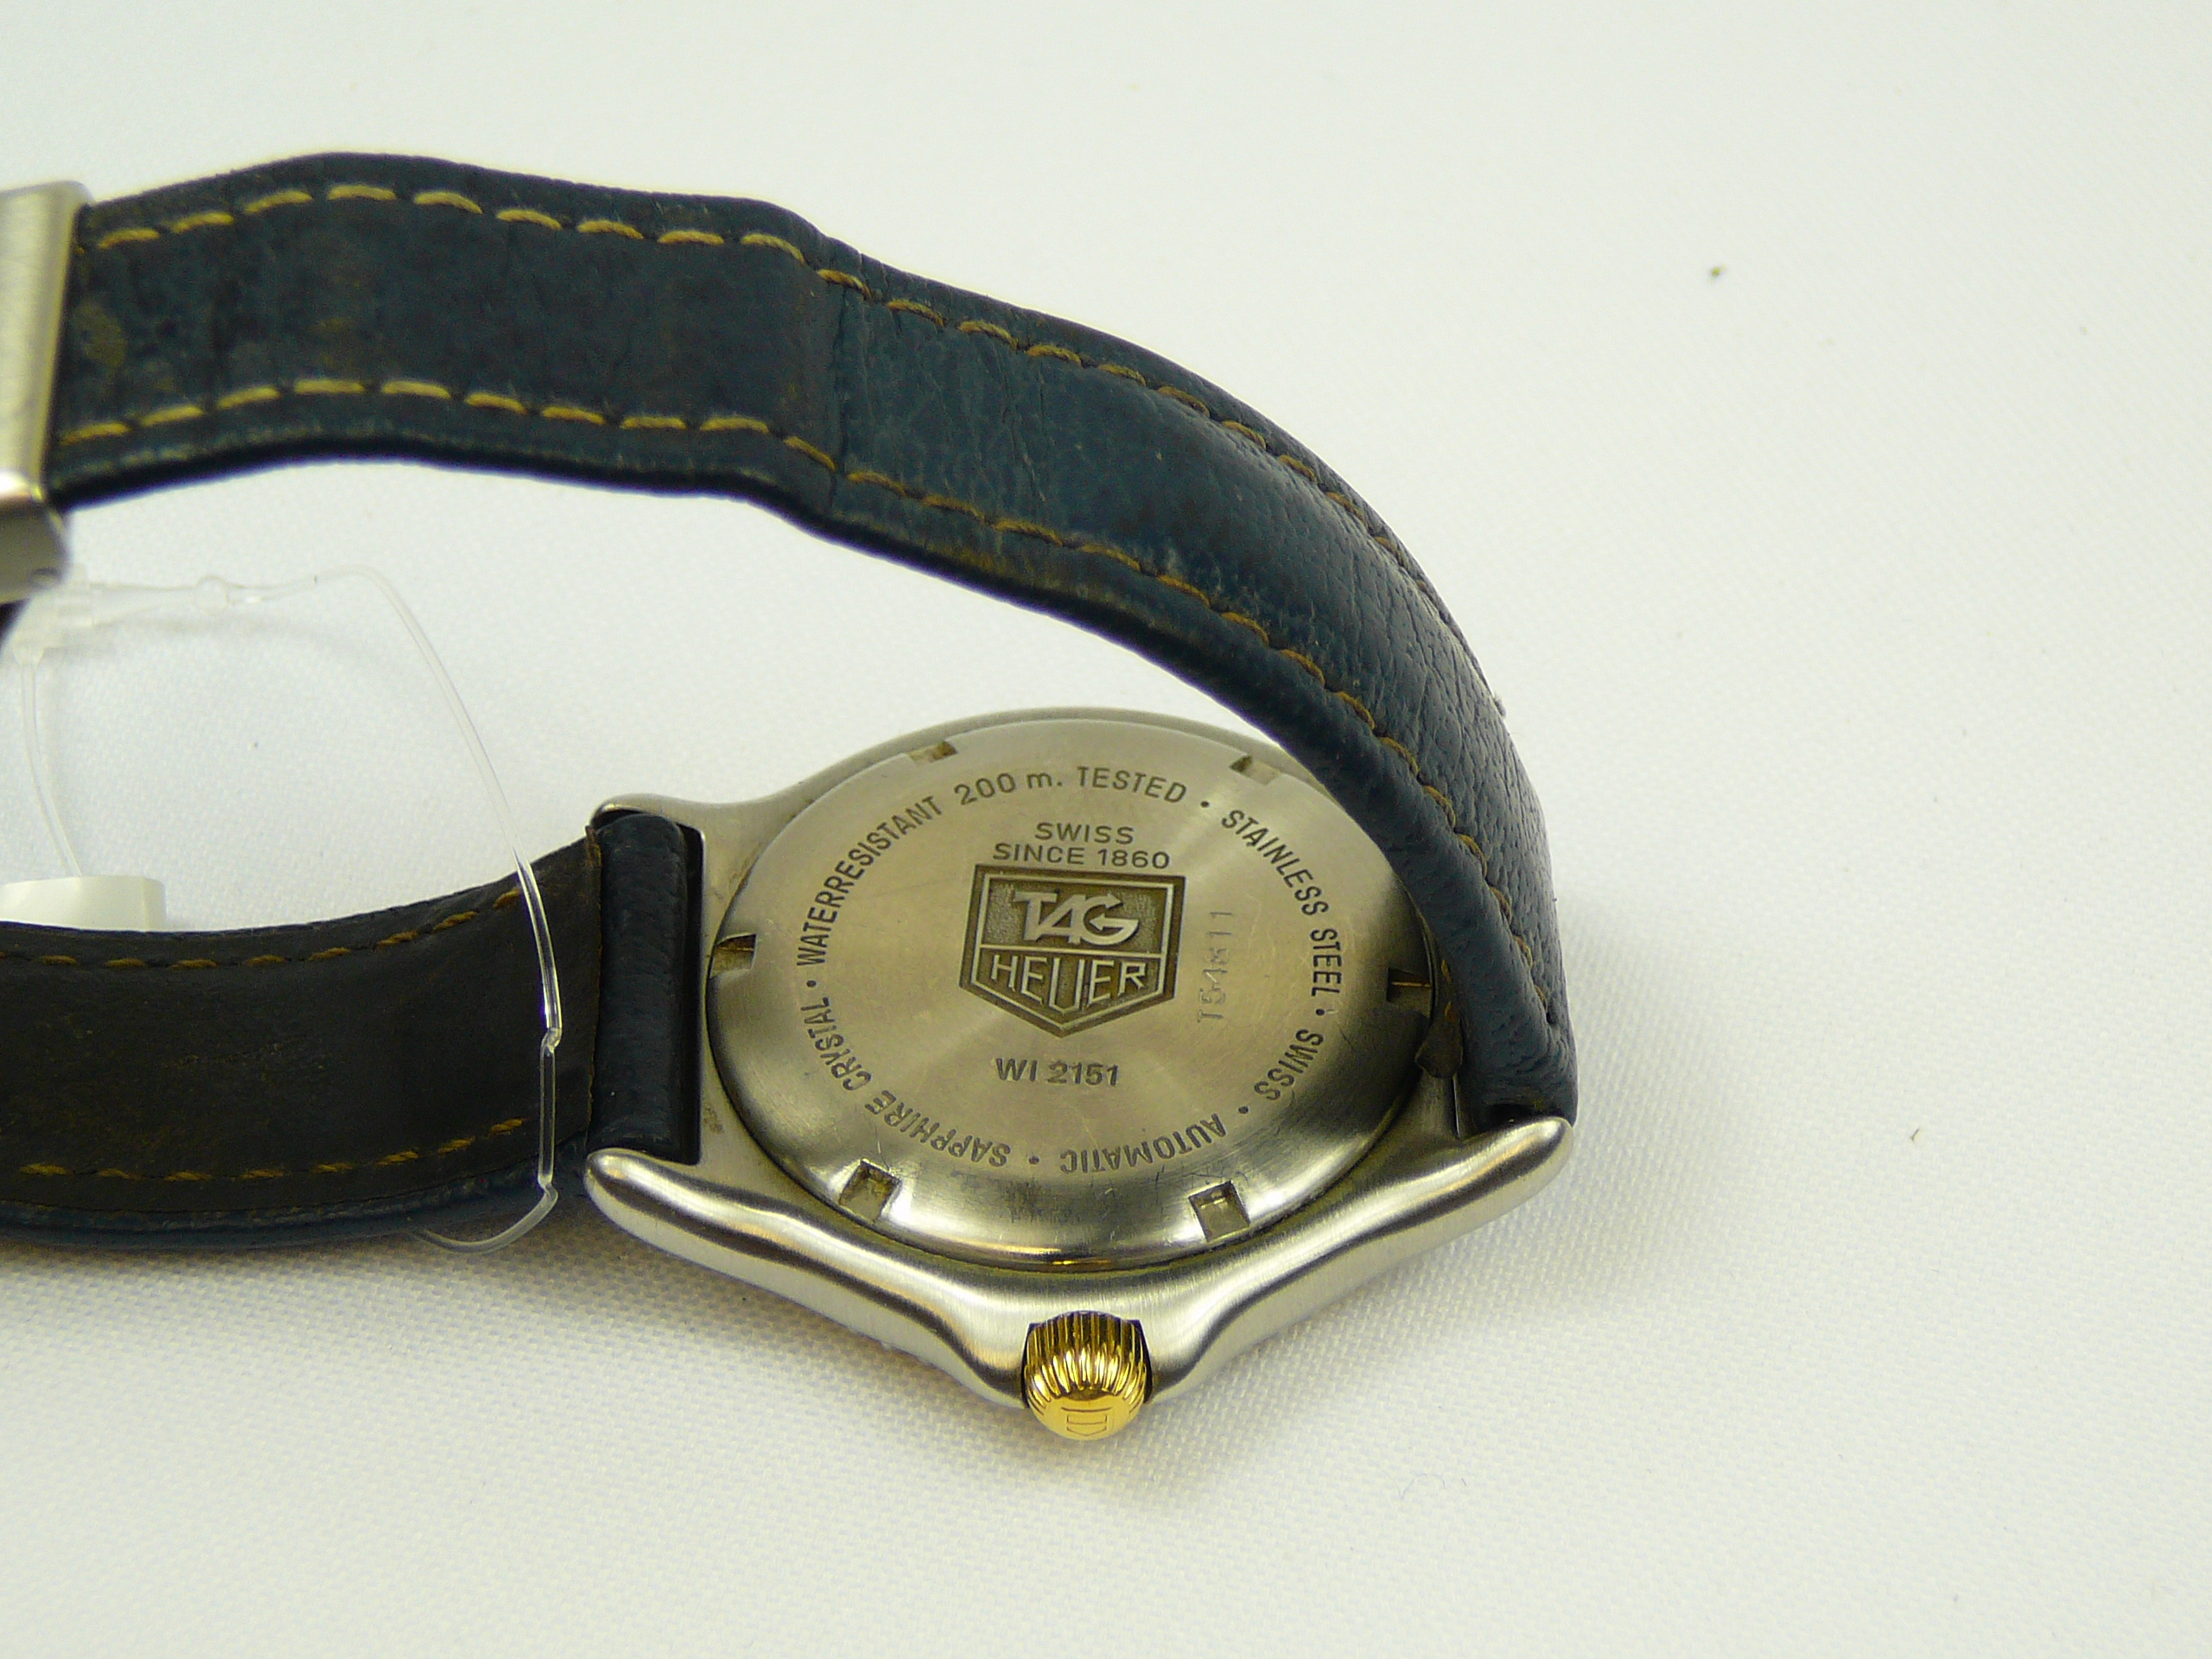 Gents Tag Heuer wrist watch - Image 5 of 6